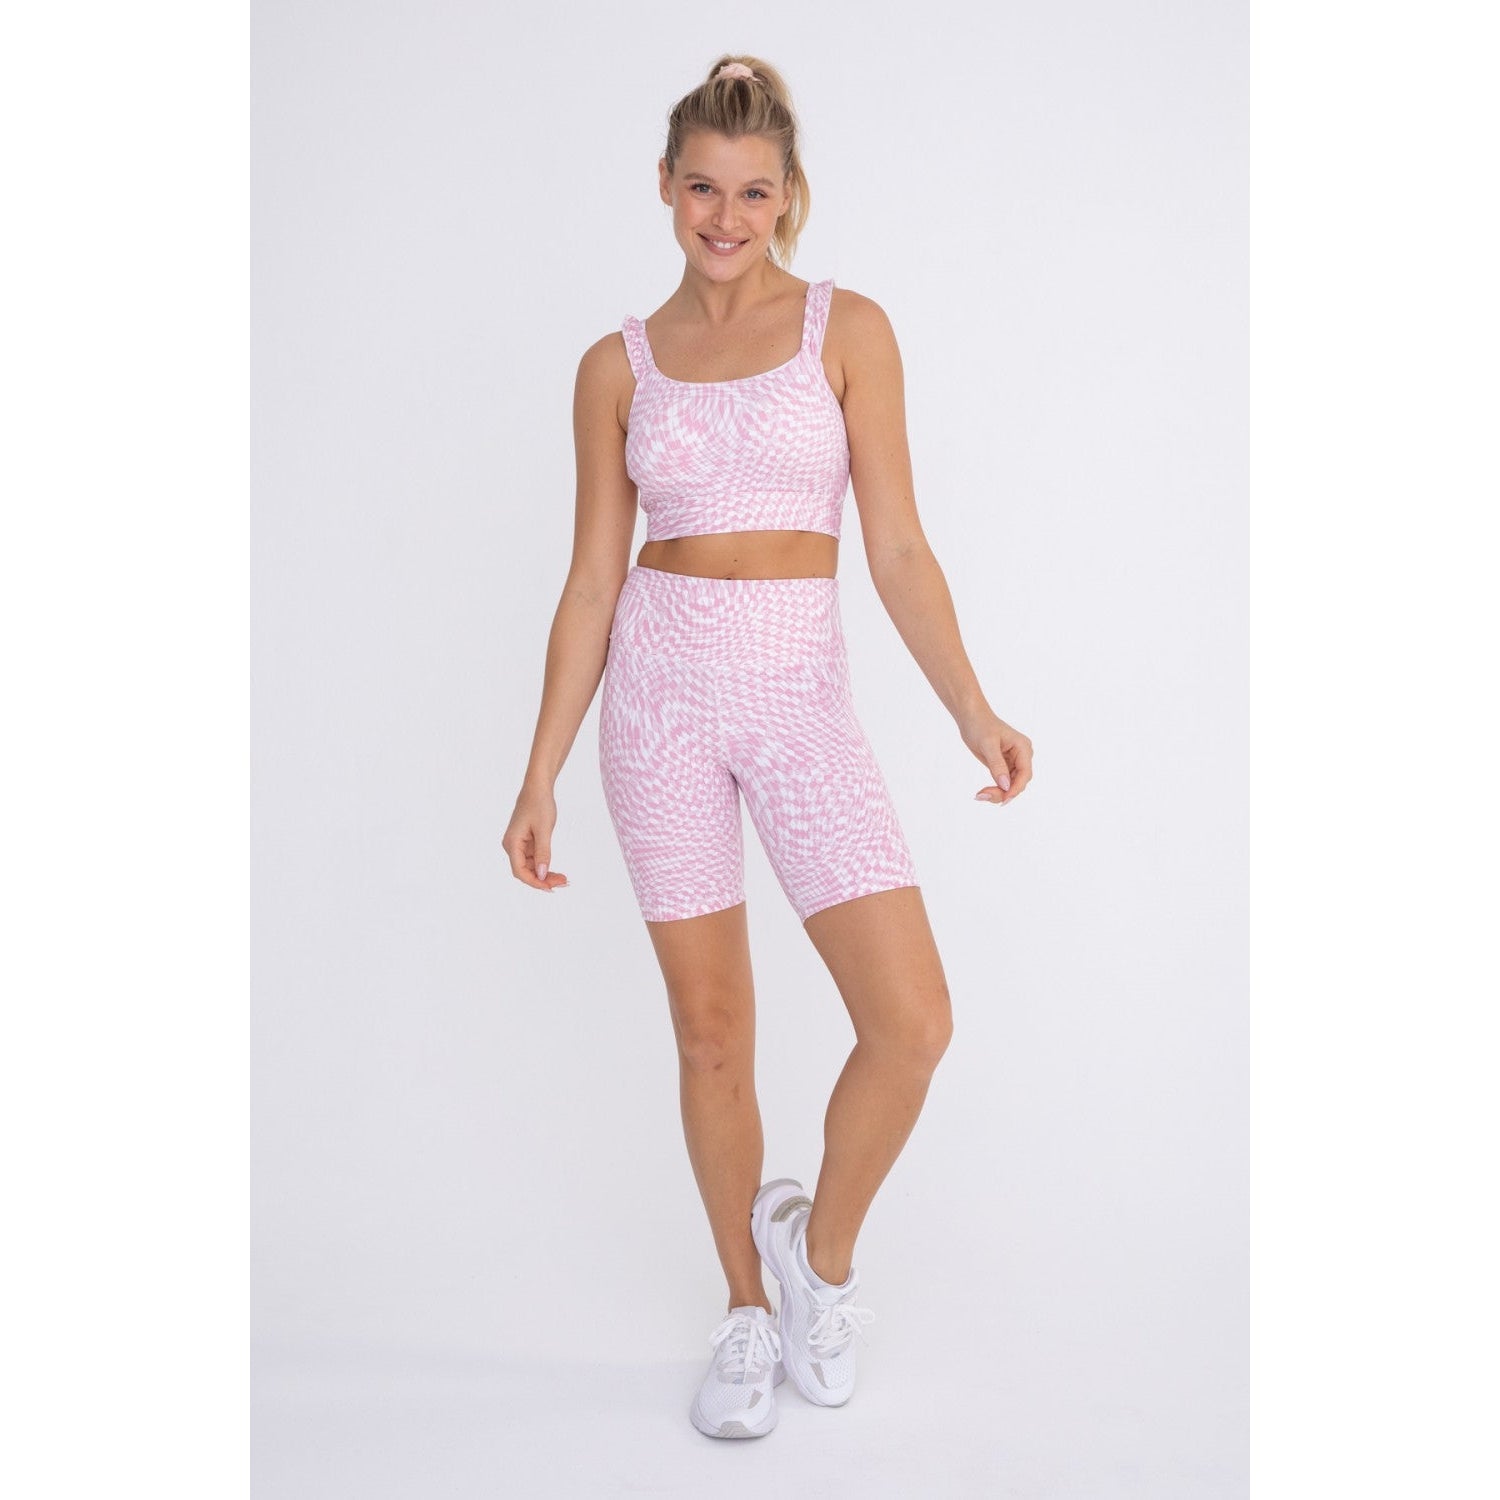 Bo + Tee Pink Seamless Biker Shorts Size M - $20 (44% Off Retail) - From  Brooke